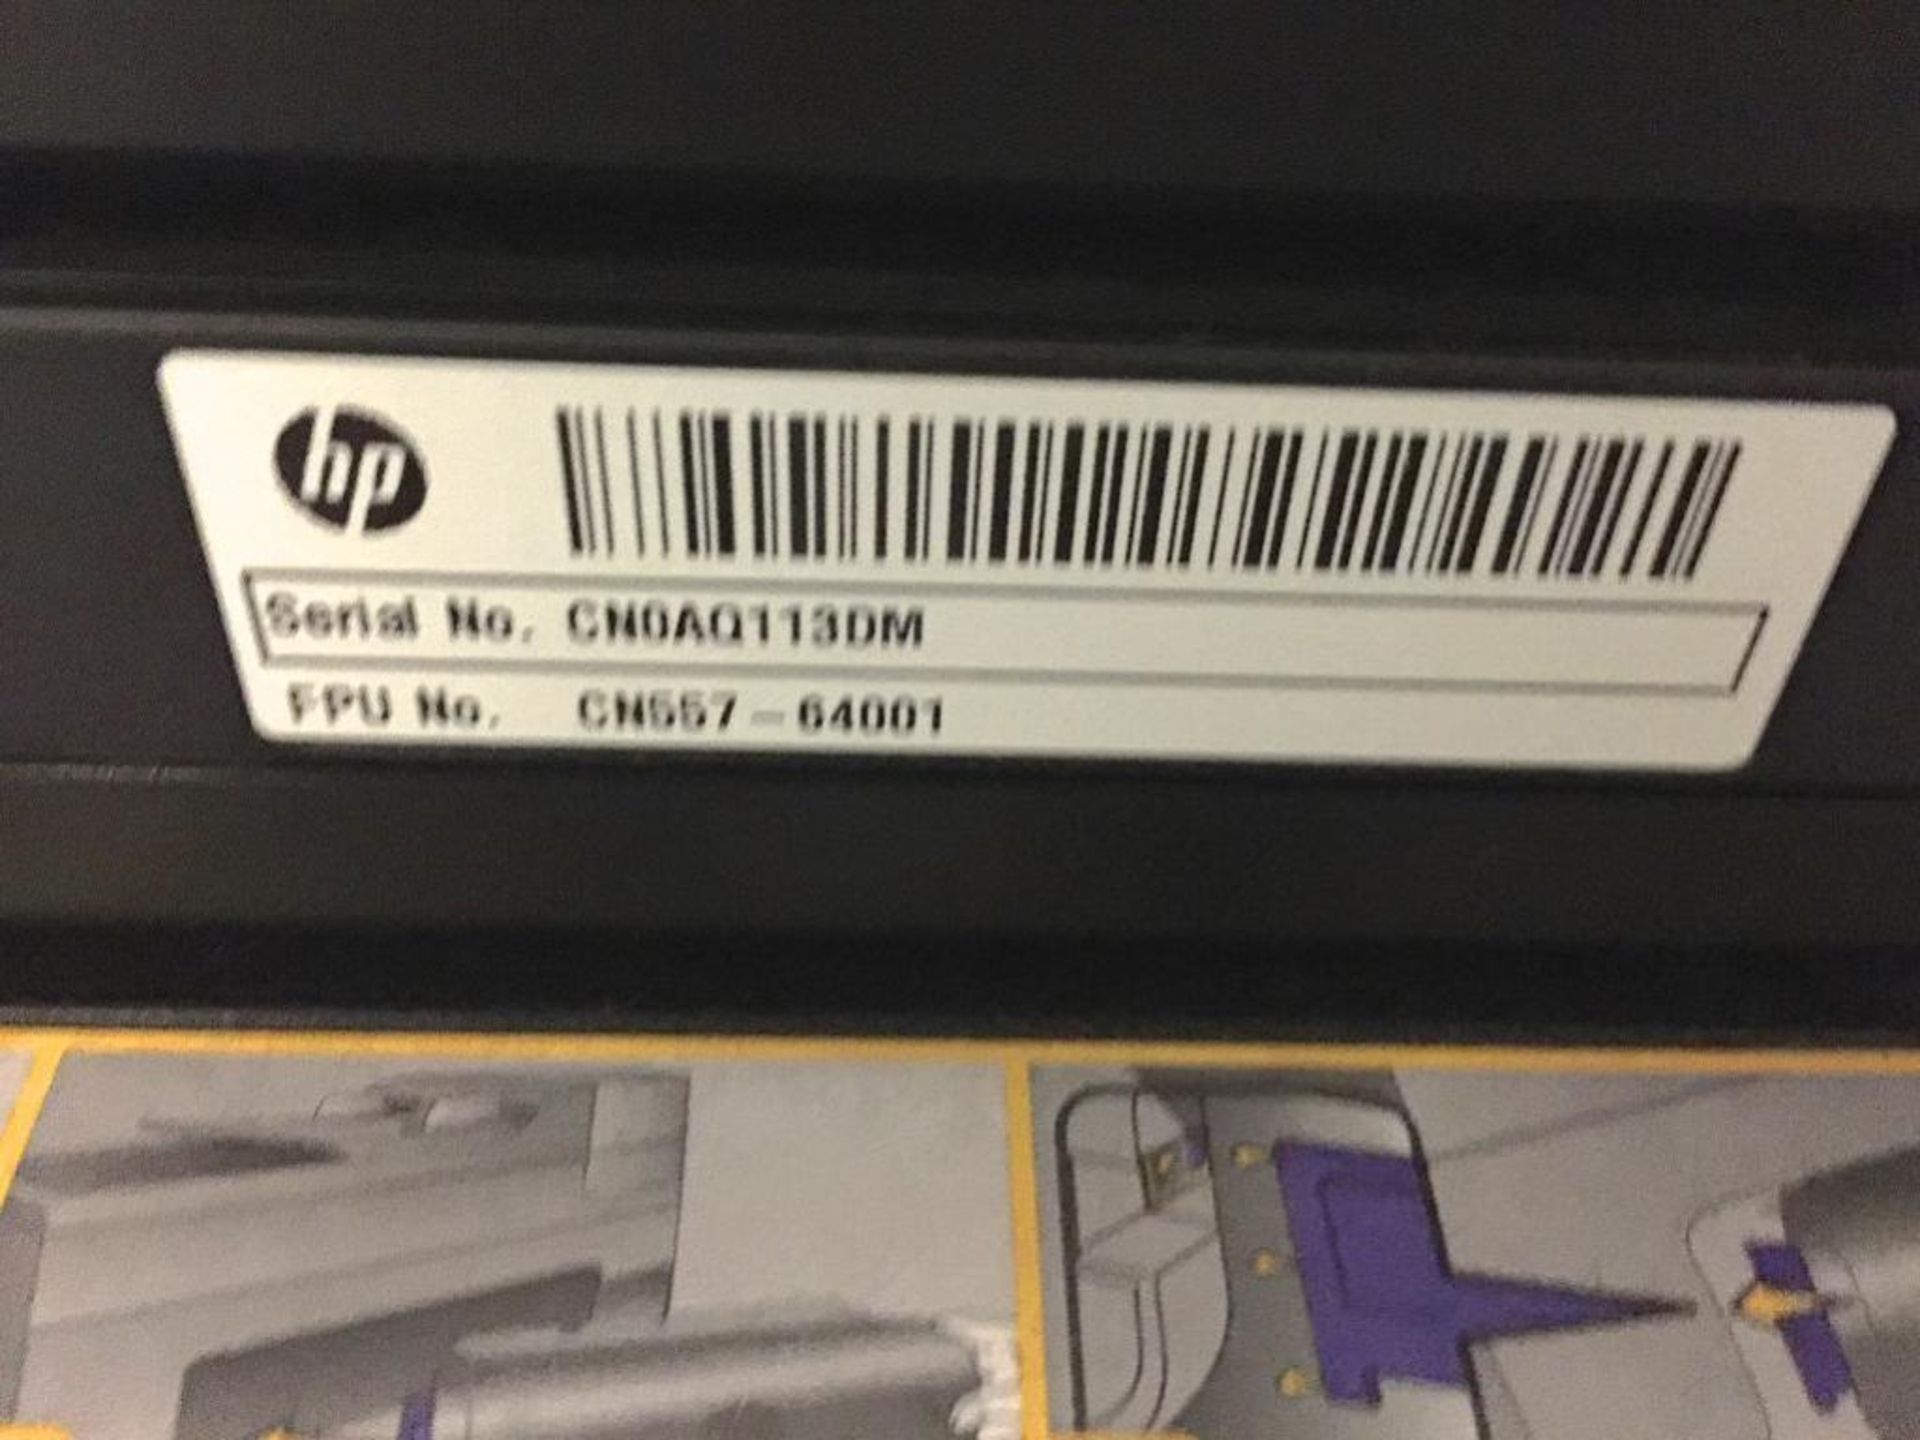 Printer. HP Printer all in one Model 6500 A+ Desk top type black color - Image 3 of 4